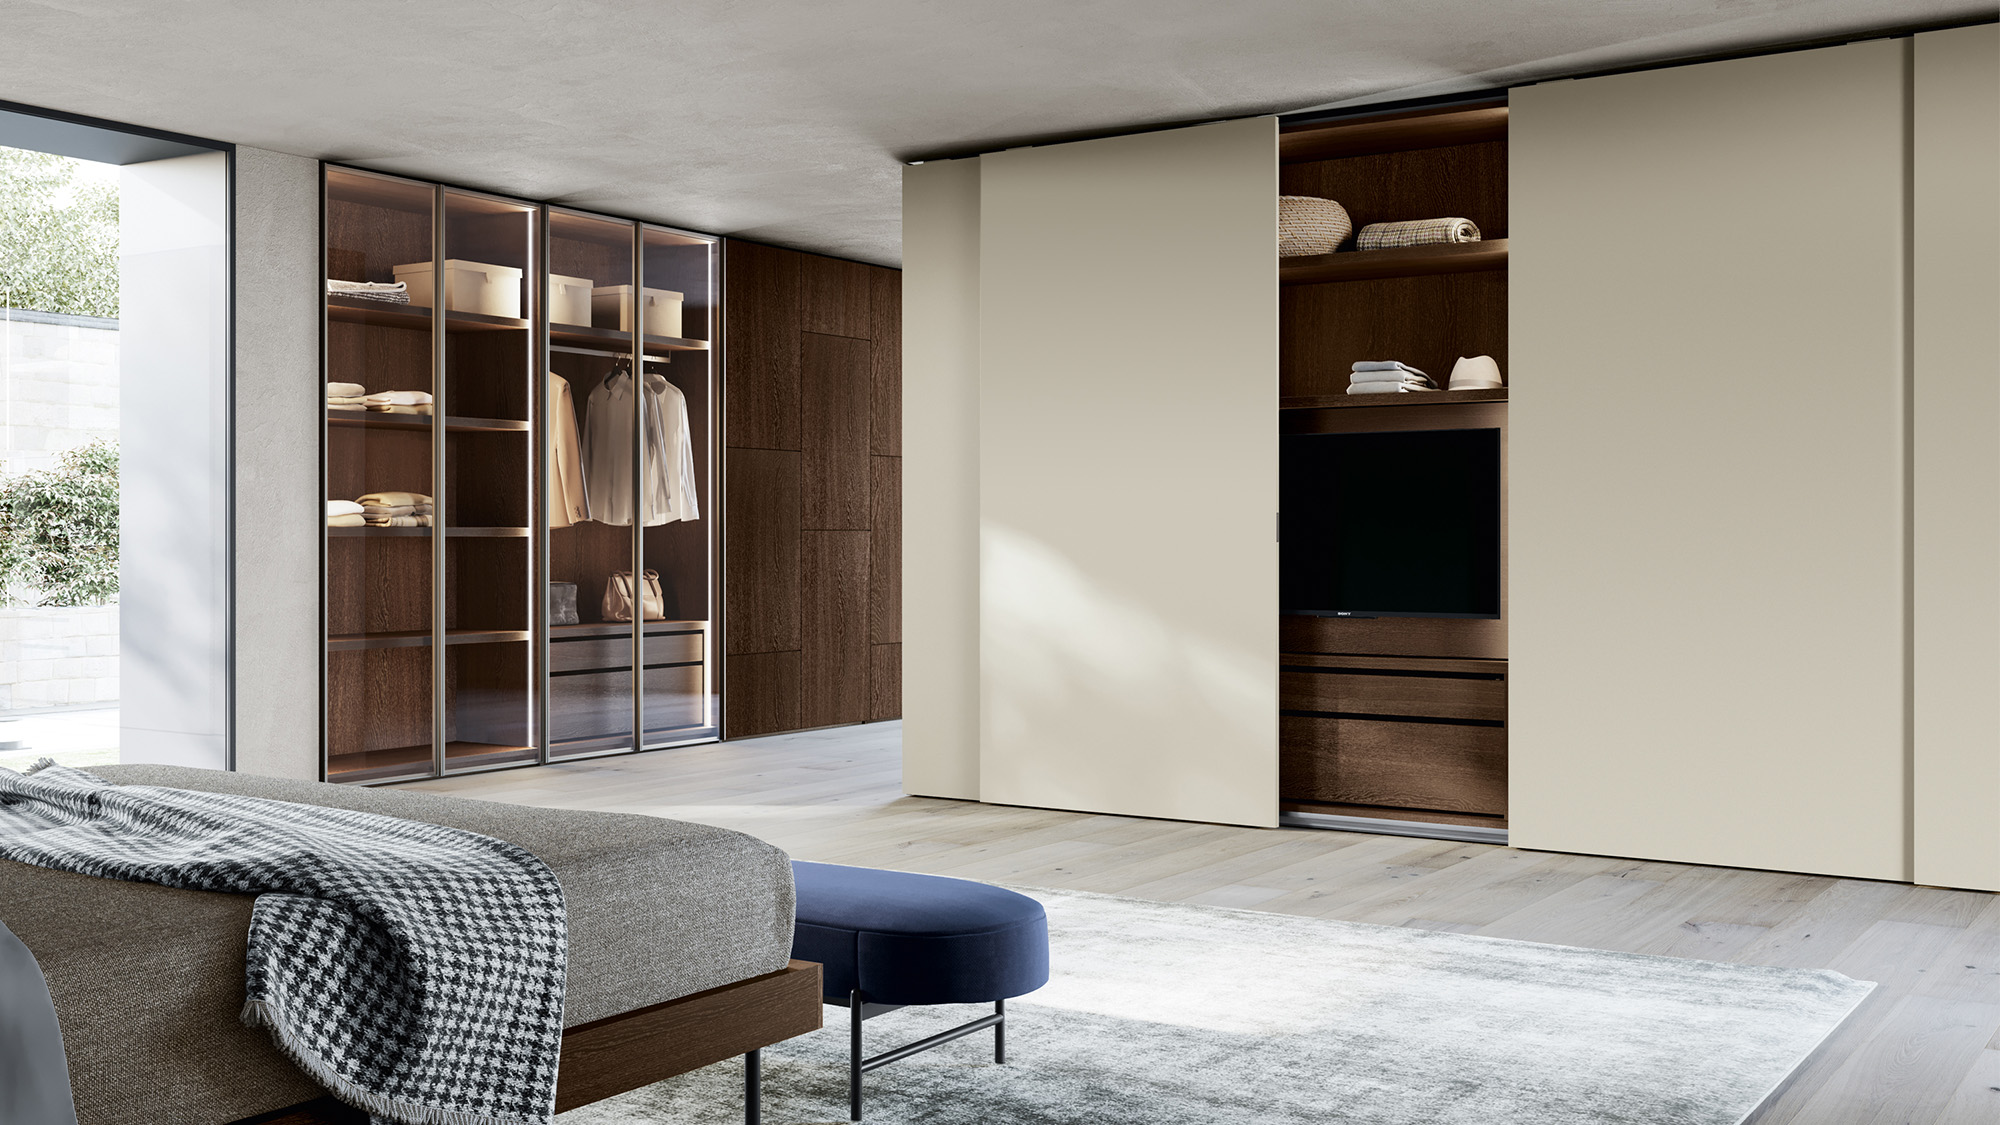 Bedroom with Simply sliding door wardrobe, Glass Up hinged door wardrobe, Boiserie hinged door wardrobe and Volume bed | Dallagnese